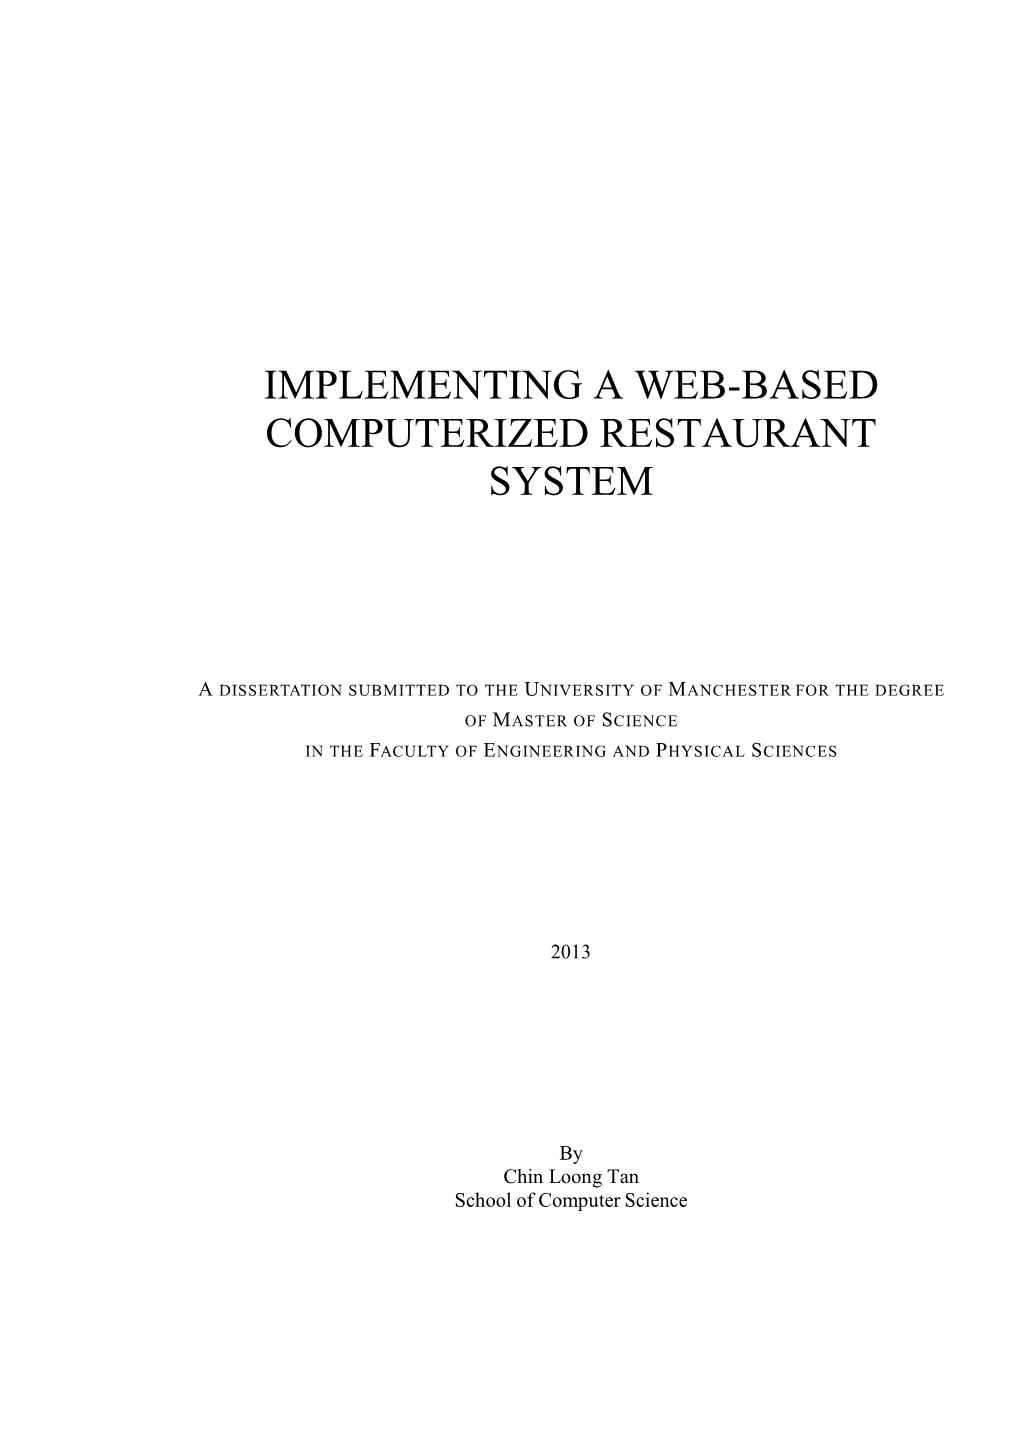 Implementing a Web-Based Computerized Restaurant System